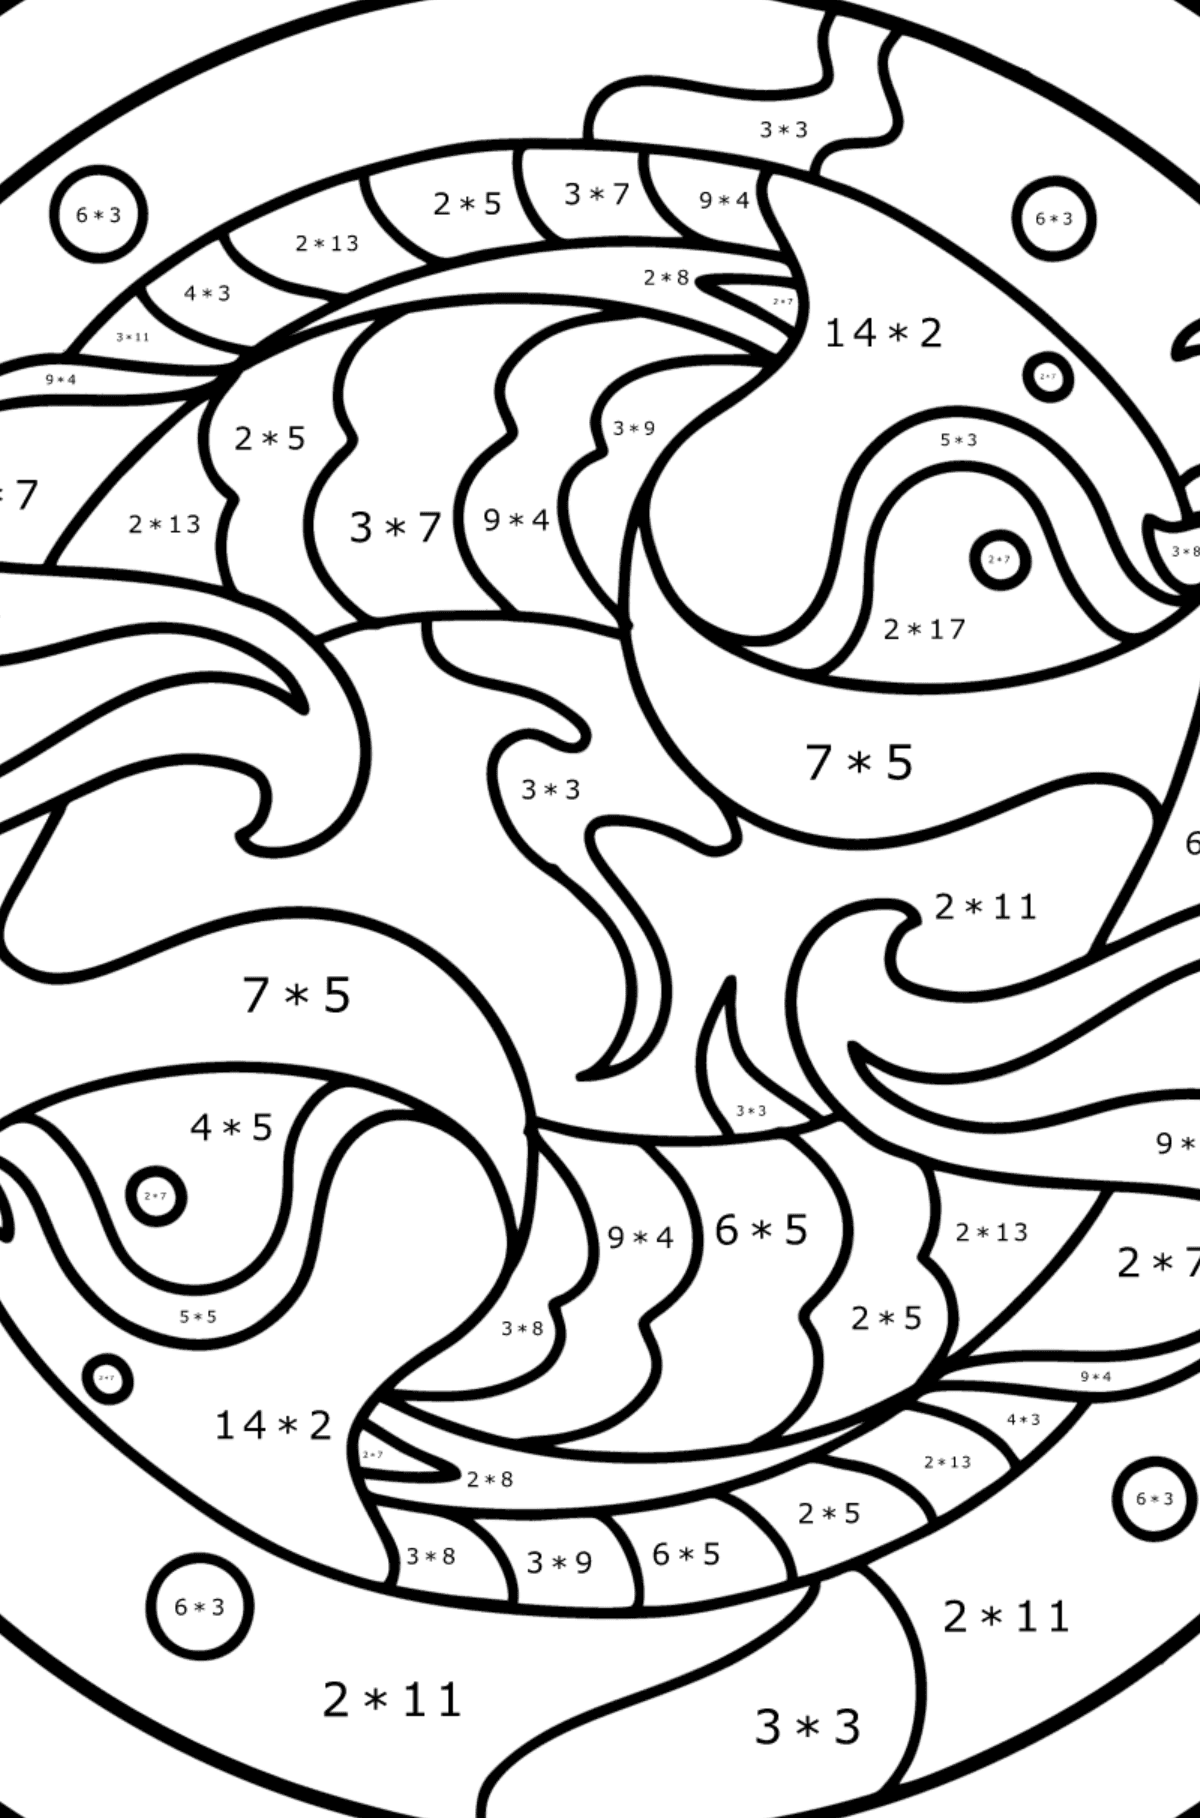 Coloring page for kids - zodiac sign Pisces - Math Coloring - Multiplication for Kids